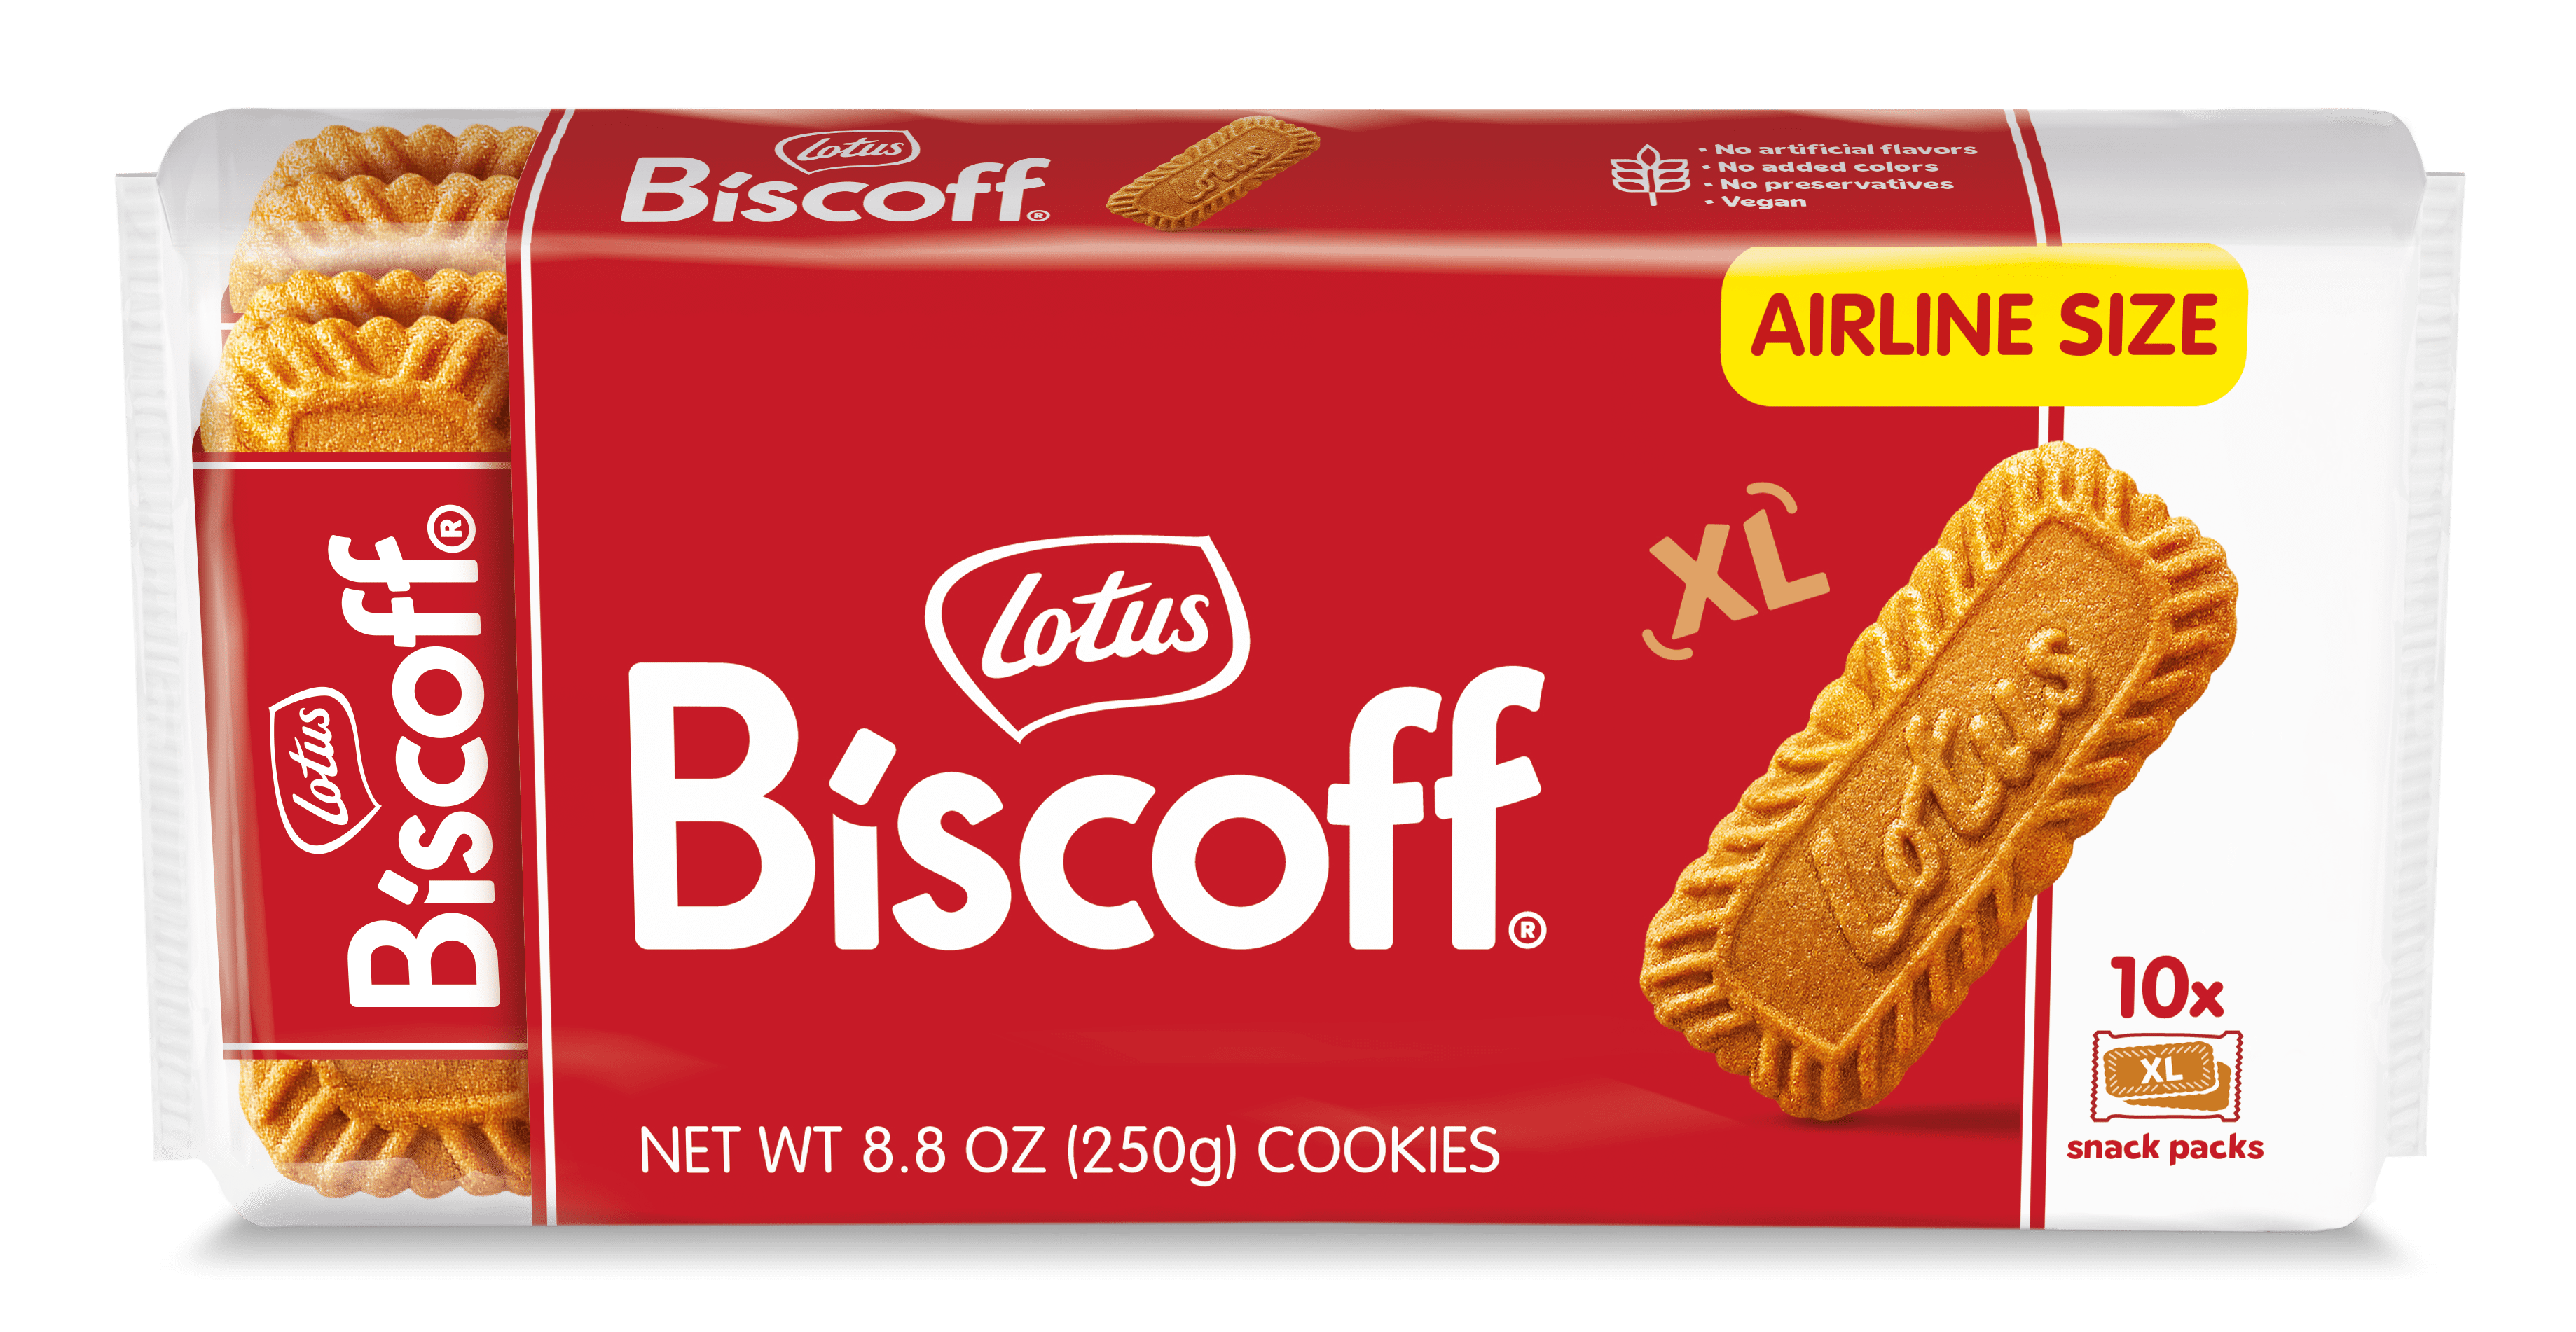 Lotus Biscoff Biscuit Caramelized Cookies Original, 8.8 oz (Pack of 10) -  Whole And Natural